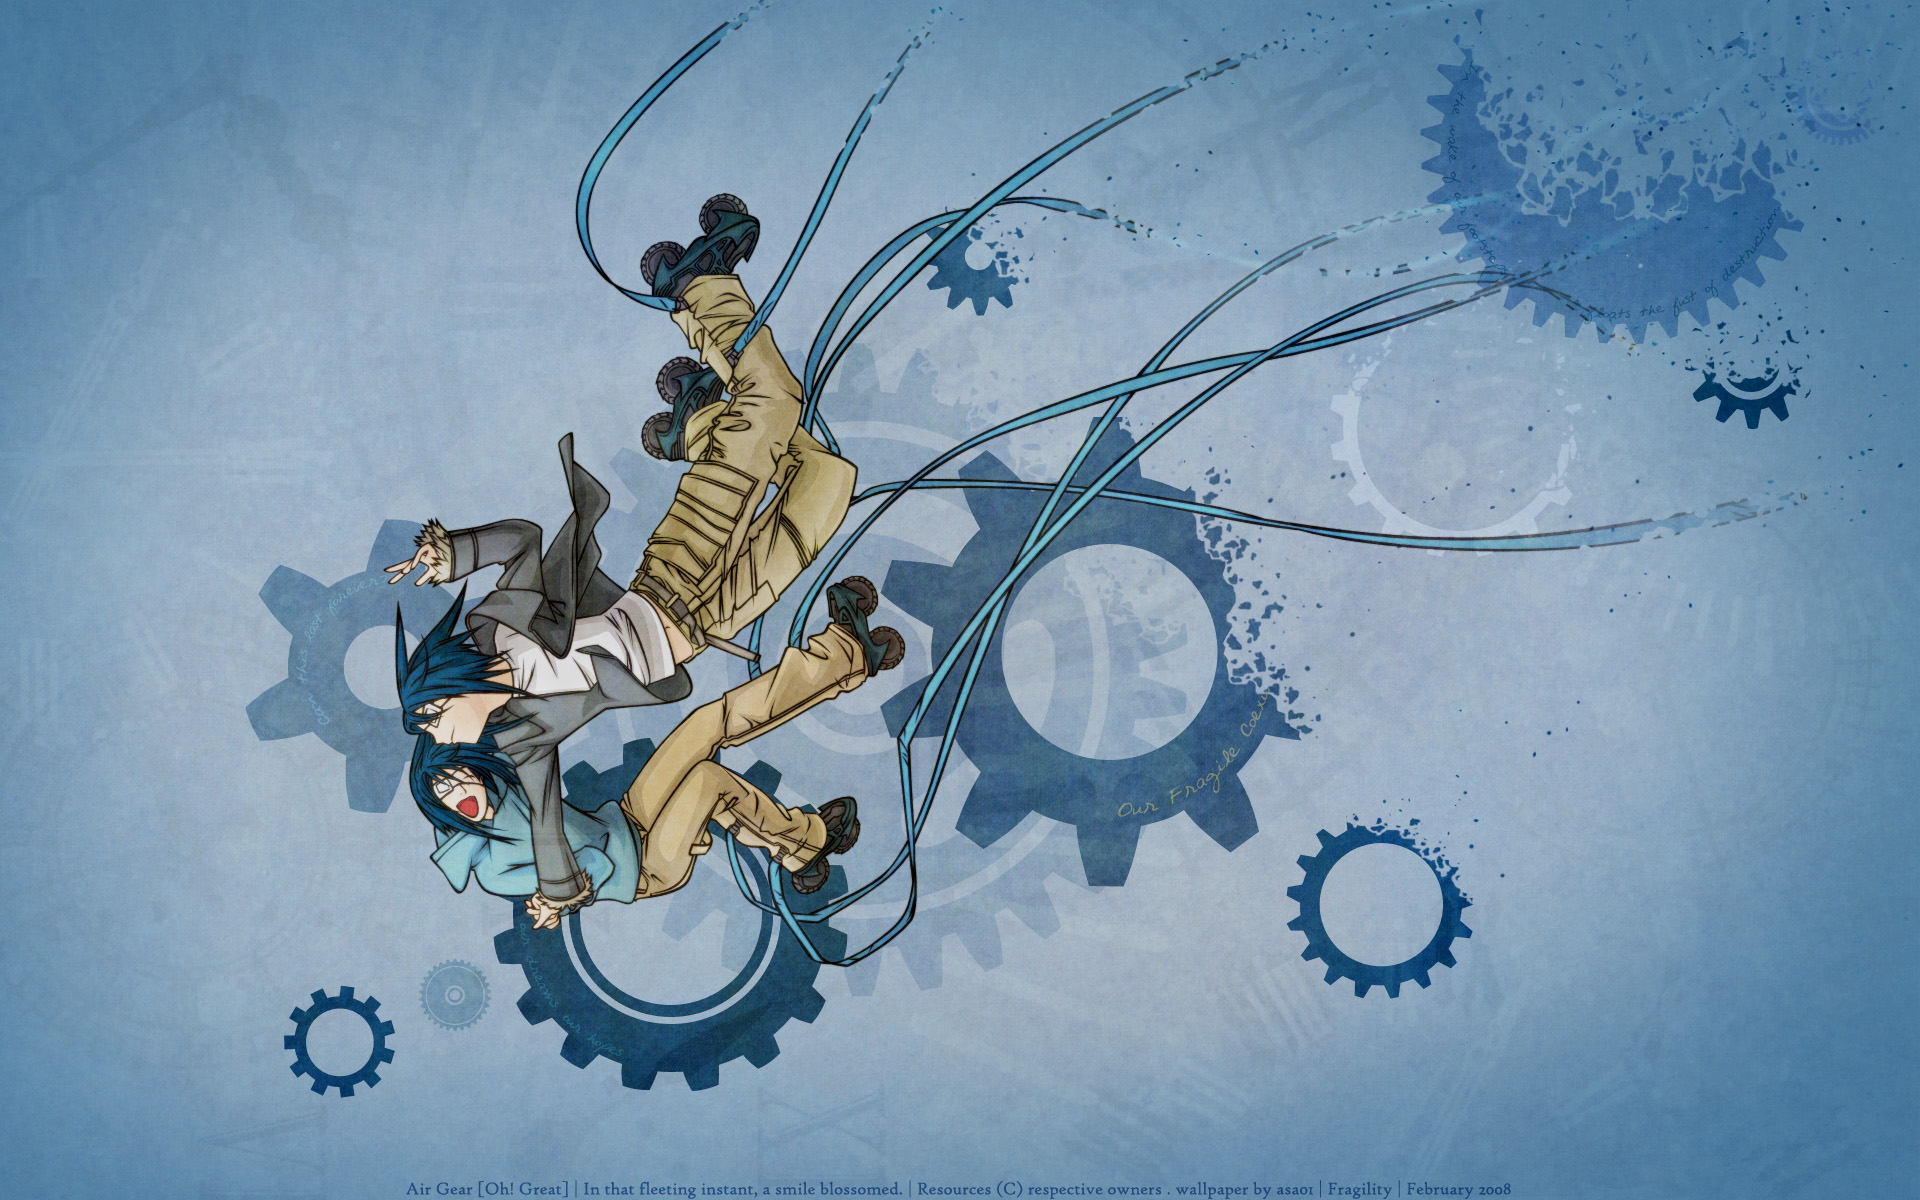 Vibrant anime-inspired desktop wallpaper featuring characters from Air Gear.